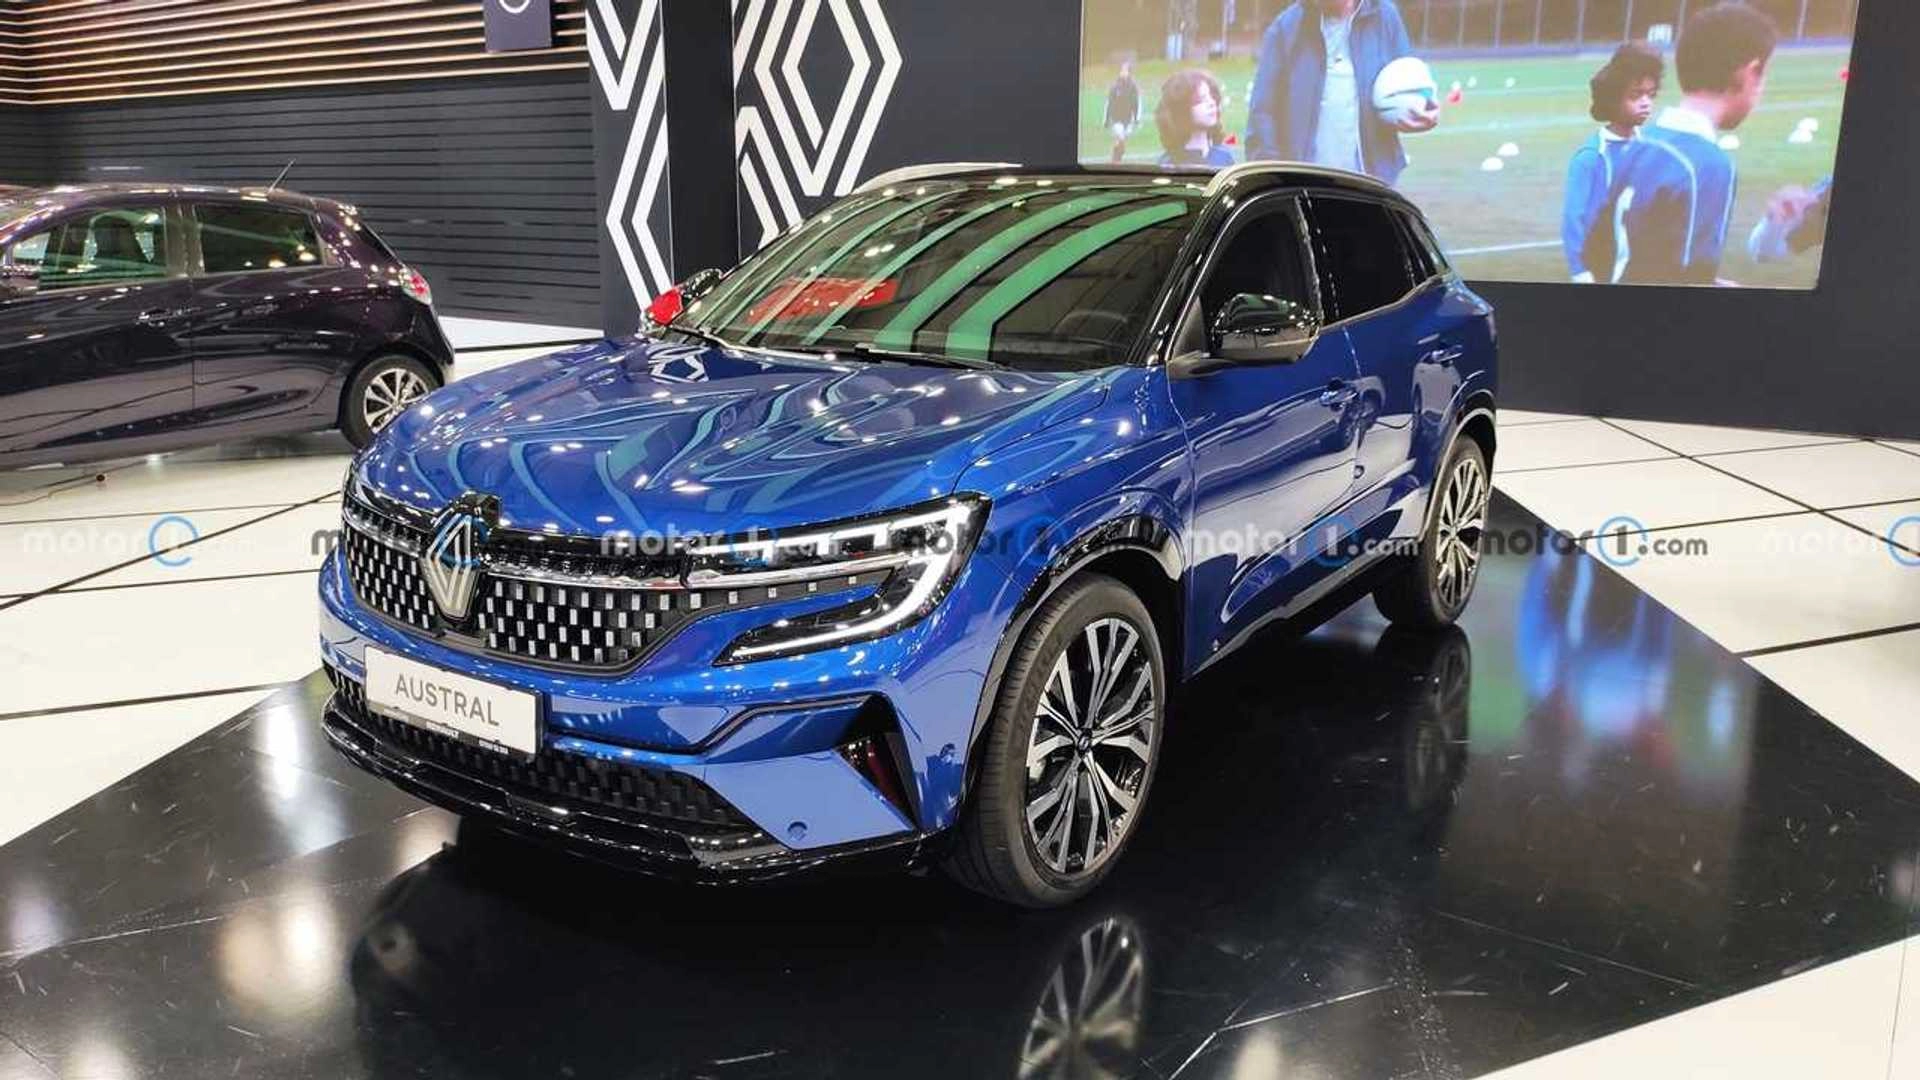 Renault Austral's Features and Specs